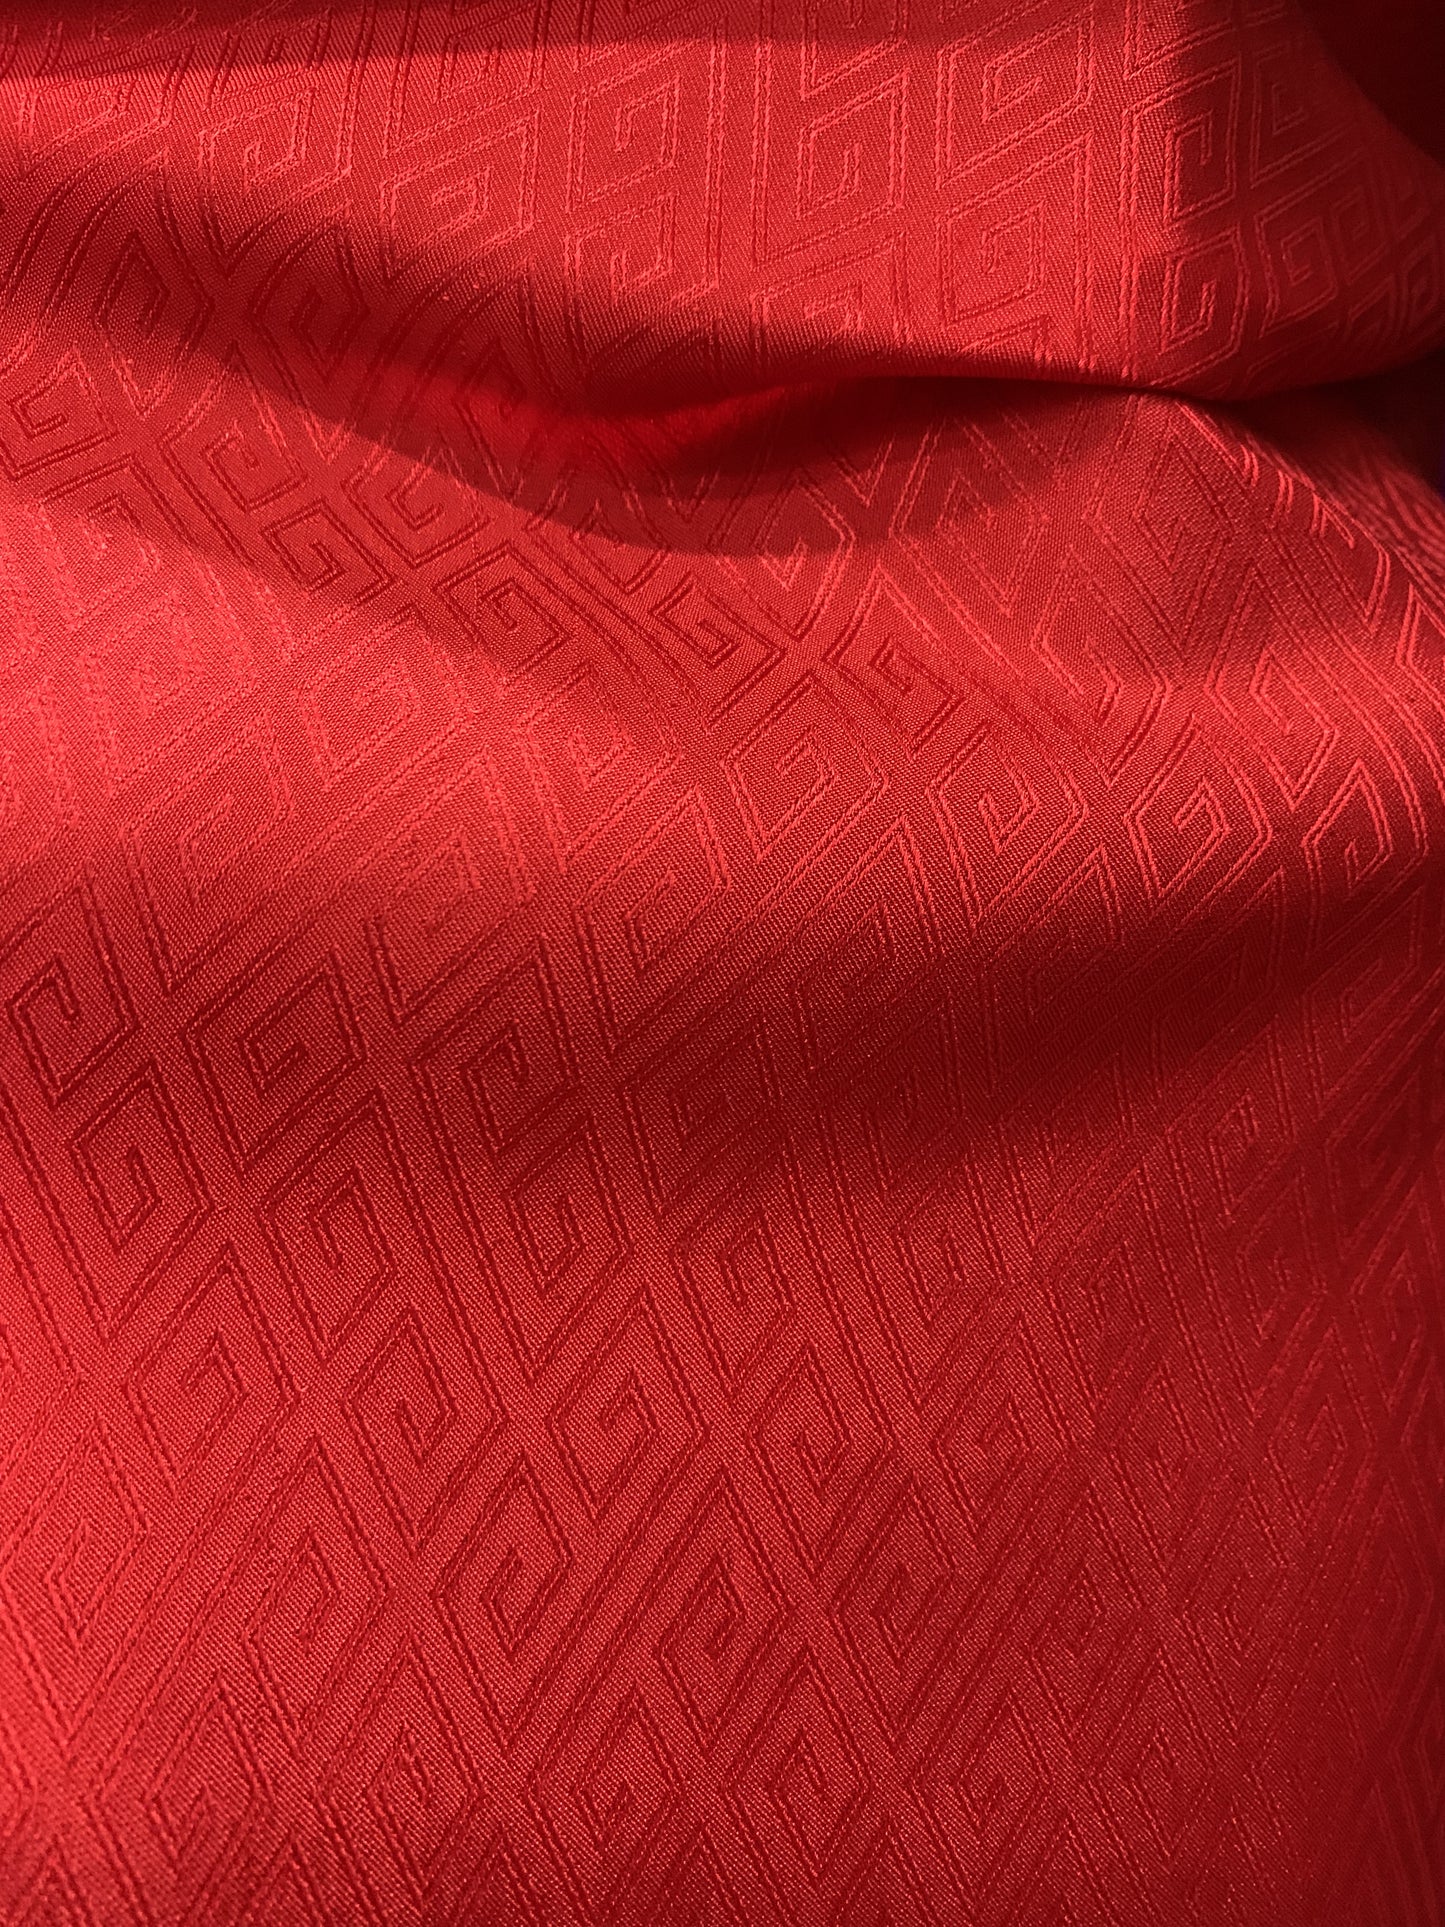 Red Silk with plaid pattern - PURE MULBERRY SILK fabric by the yard -Luxury Silk - Natural silk - Handmade in VietNam- Silk with Design